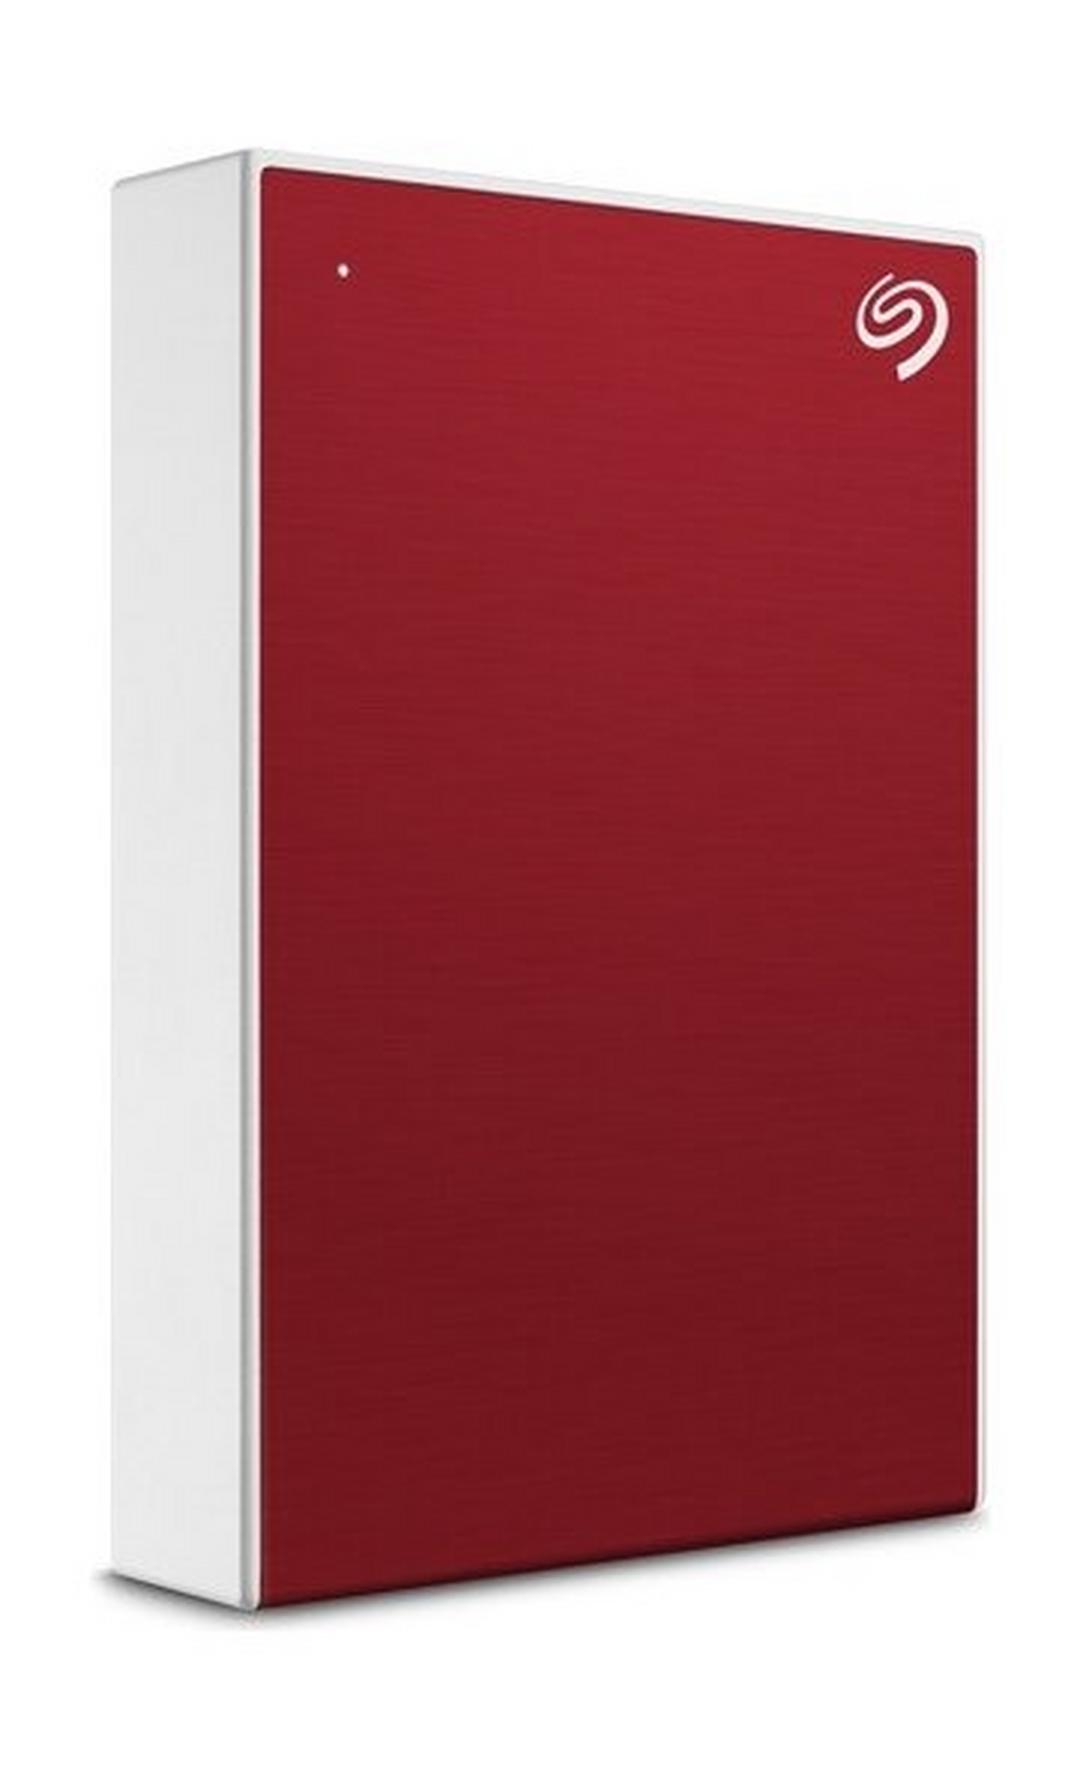 Seagate One Touch 2TB USB 3.2 Gen 1 External Hard Drive - Red